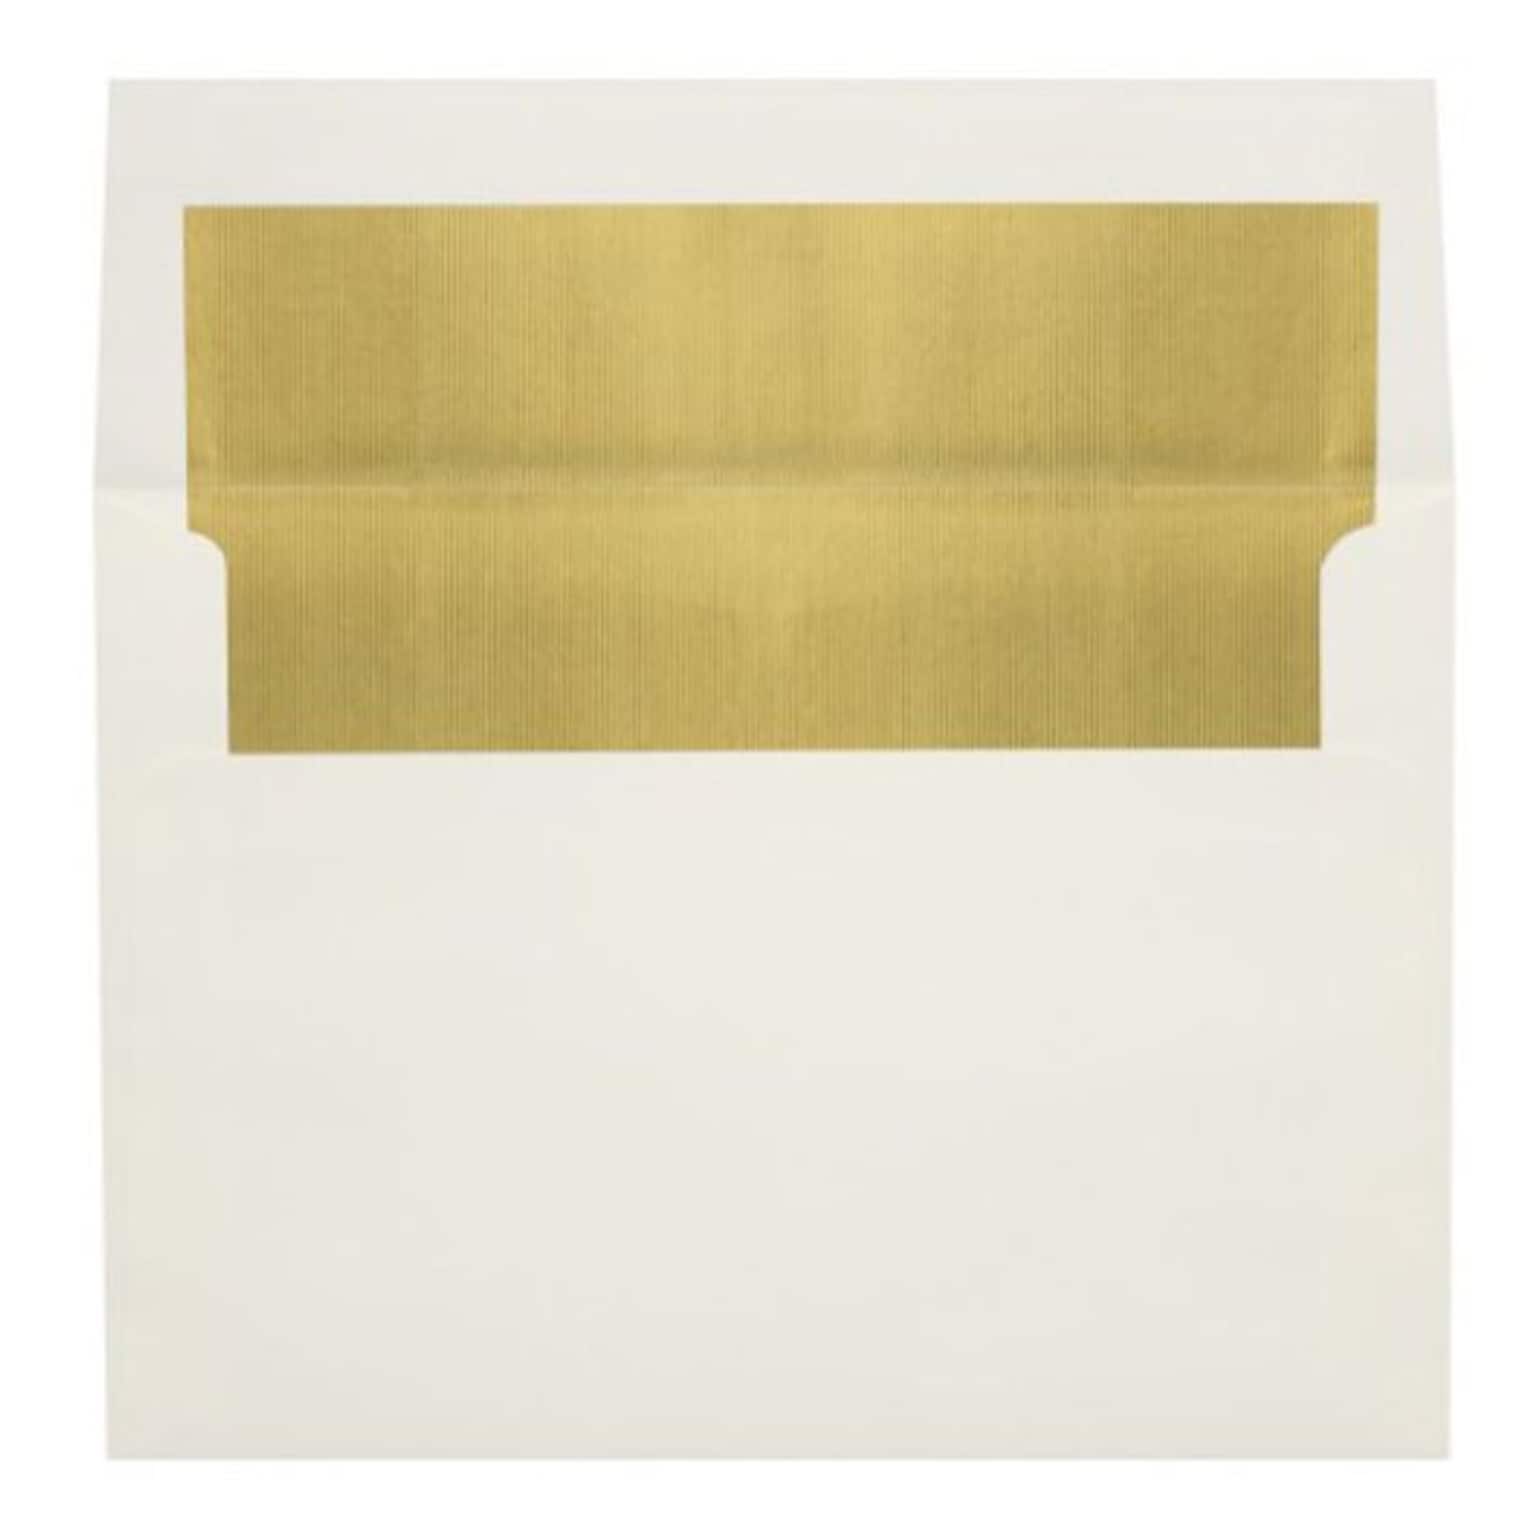 LUX A8 Foil Lined Invitation Envelopes (5 1/2 x 8 1/8) 250/Box, Natural w/Gold LUX Lining (FLNT4885-04-250)